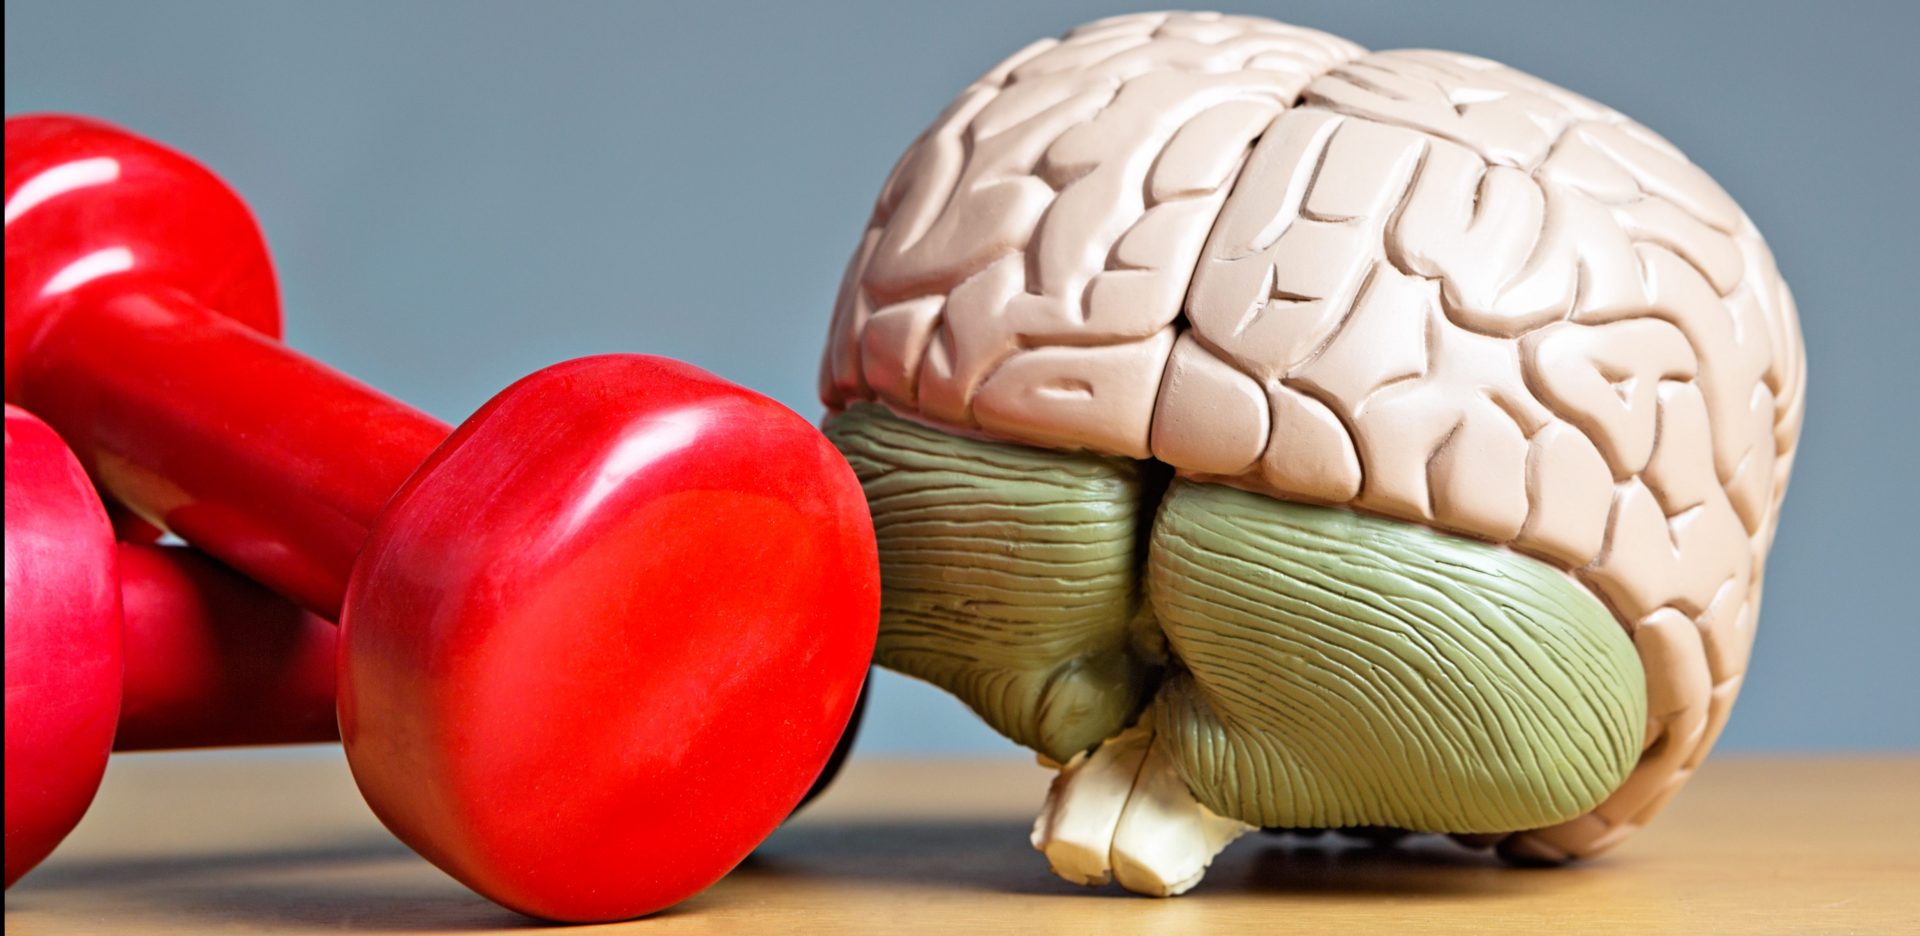 An anatomical model of the human brain sits next to two red weights. Your brain needs to keep fit as well as your body!.